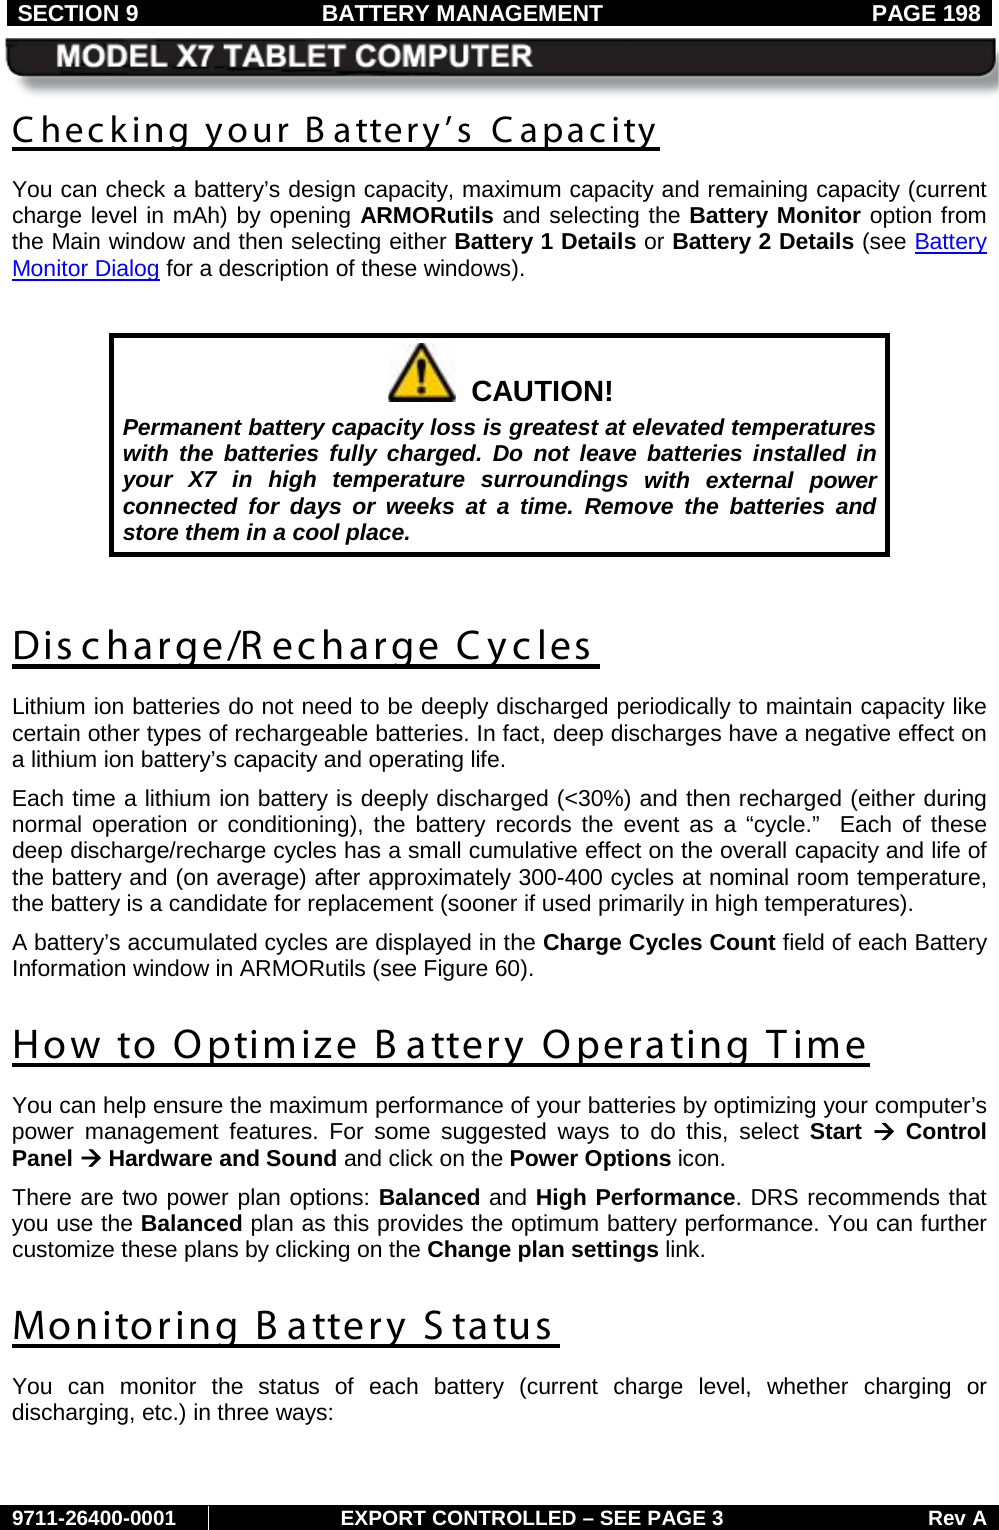 SECTION 9 BATTERY MANAGEMENT  PAGE 198     9711-26400-0001 EXPORT CONTROLLED – SEE PAGE 3 Rev A Checking your Battery’s Capacity You can check a battery’s design capacity, maximum capacity and remaining capacity (current charge level in mAh) by opening ARMORutils and selecting the Battery Monitor option from the Main window and then selecting either Battery 1 Details or Battery 2 Details (see Battery Monitor Dialog for a description of these windows).    CAUTION! Permanent battery capacity loss is greatest at elevated temperatures with the batteries fully charged. Do not leave batteries installed in your X7 in high temperature surroundings with external power connected  for days or weeks at a time. Remove the batteries and store them in a cool place.  Discharge/R echarge Cycles Lithium ion batteries do not need to be deeply discharged periodically to maintain capacity like certain other types of rechargeable batteries. In fact, deep discharges have a negative effect on a lithium ion battery’s capacity and operating life.  Each time a lithium ion battery is deeply discharged (&lt;30%) and then recharged (either during normal operation or conditioning), the battery records the event as a “cycle.”  Each of these deep discharge/recharge cycles has a small cumulative effect on the overall capacity and life of the battery and (on average) after approximately 300-400 cycles at nominal room temperature, the battery is a candidate for replacement (sooner if used primarily in high temperatures).  A battery’s accumulated cycles are displayed in the Charge Cycles Count field of each Battery Information window in ARMORutils (see Figure 60).  How to Optimize B attery Operating Time You can help ensure the maximum performance of your batteries by optimizing your computer’s power management features. For some suggested ways to do this, select Start  à Control Panel à Hardware and Sound and click on the Power Options icon. There are two power plan options: Balanced and High Performance. DRS recommends that you use the Balanced plan as this provides the optimum battery performance. You can further customize these plans by clicking on the Change plan settings link.  Monitoring B attery S tatus  You can monitor the status  of each battery (current charge level, whether charging or discharging, etc.) in three ways:  